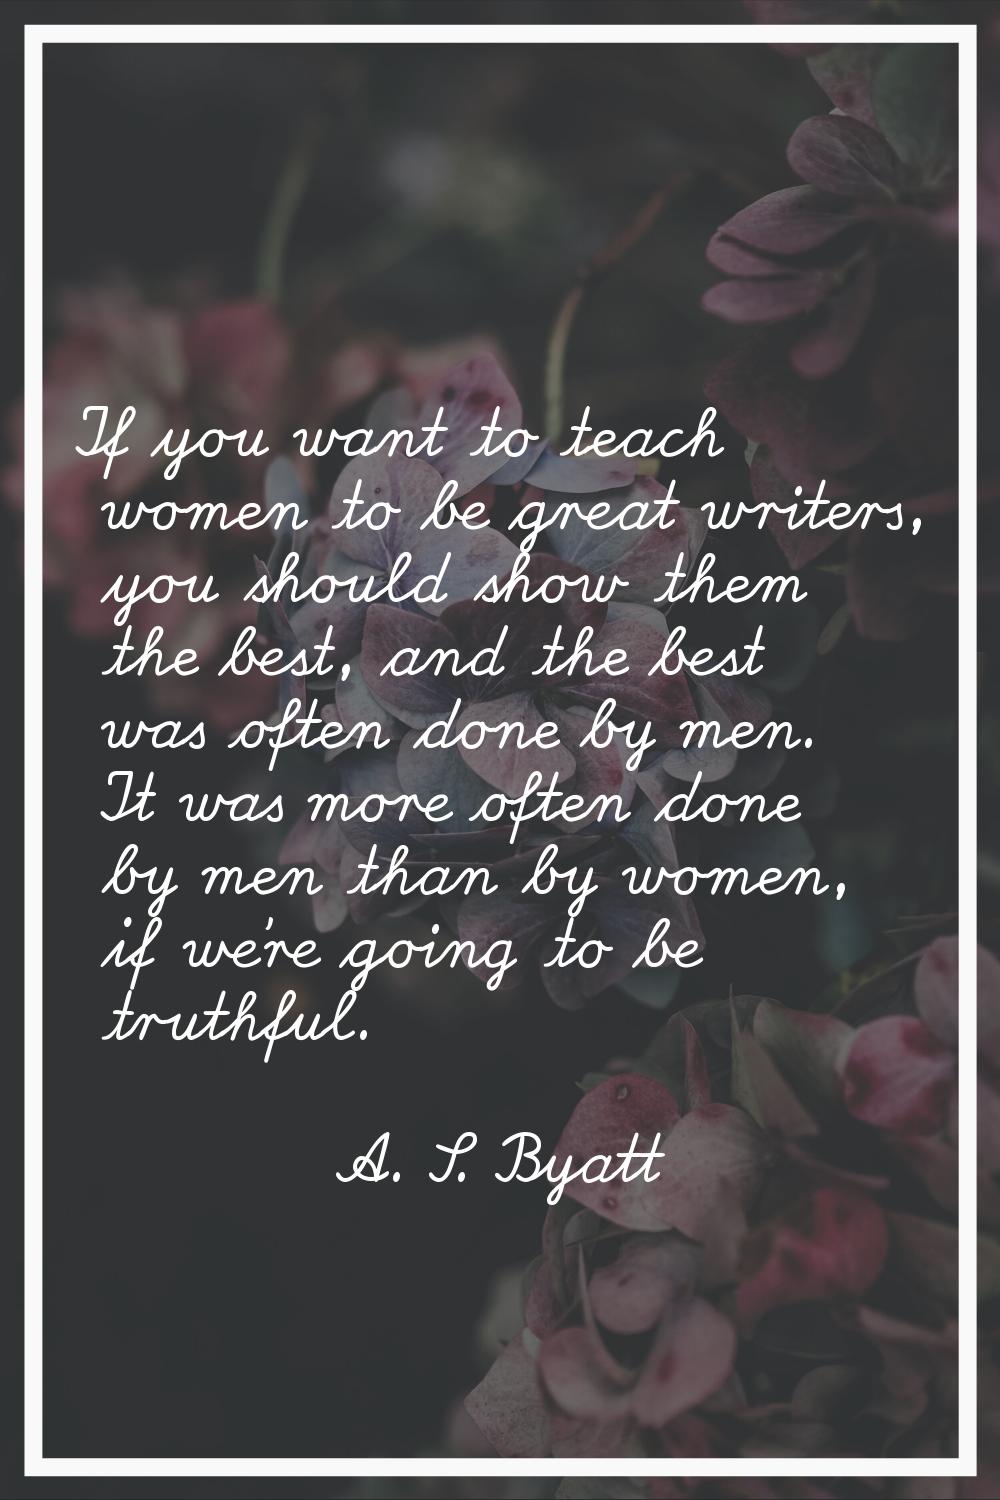 If you want to teach women to be great writers, you should show them the best, and the best was oft